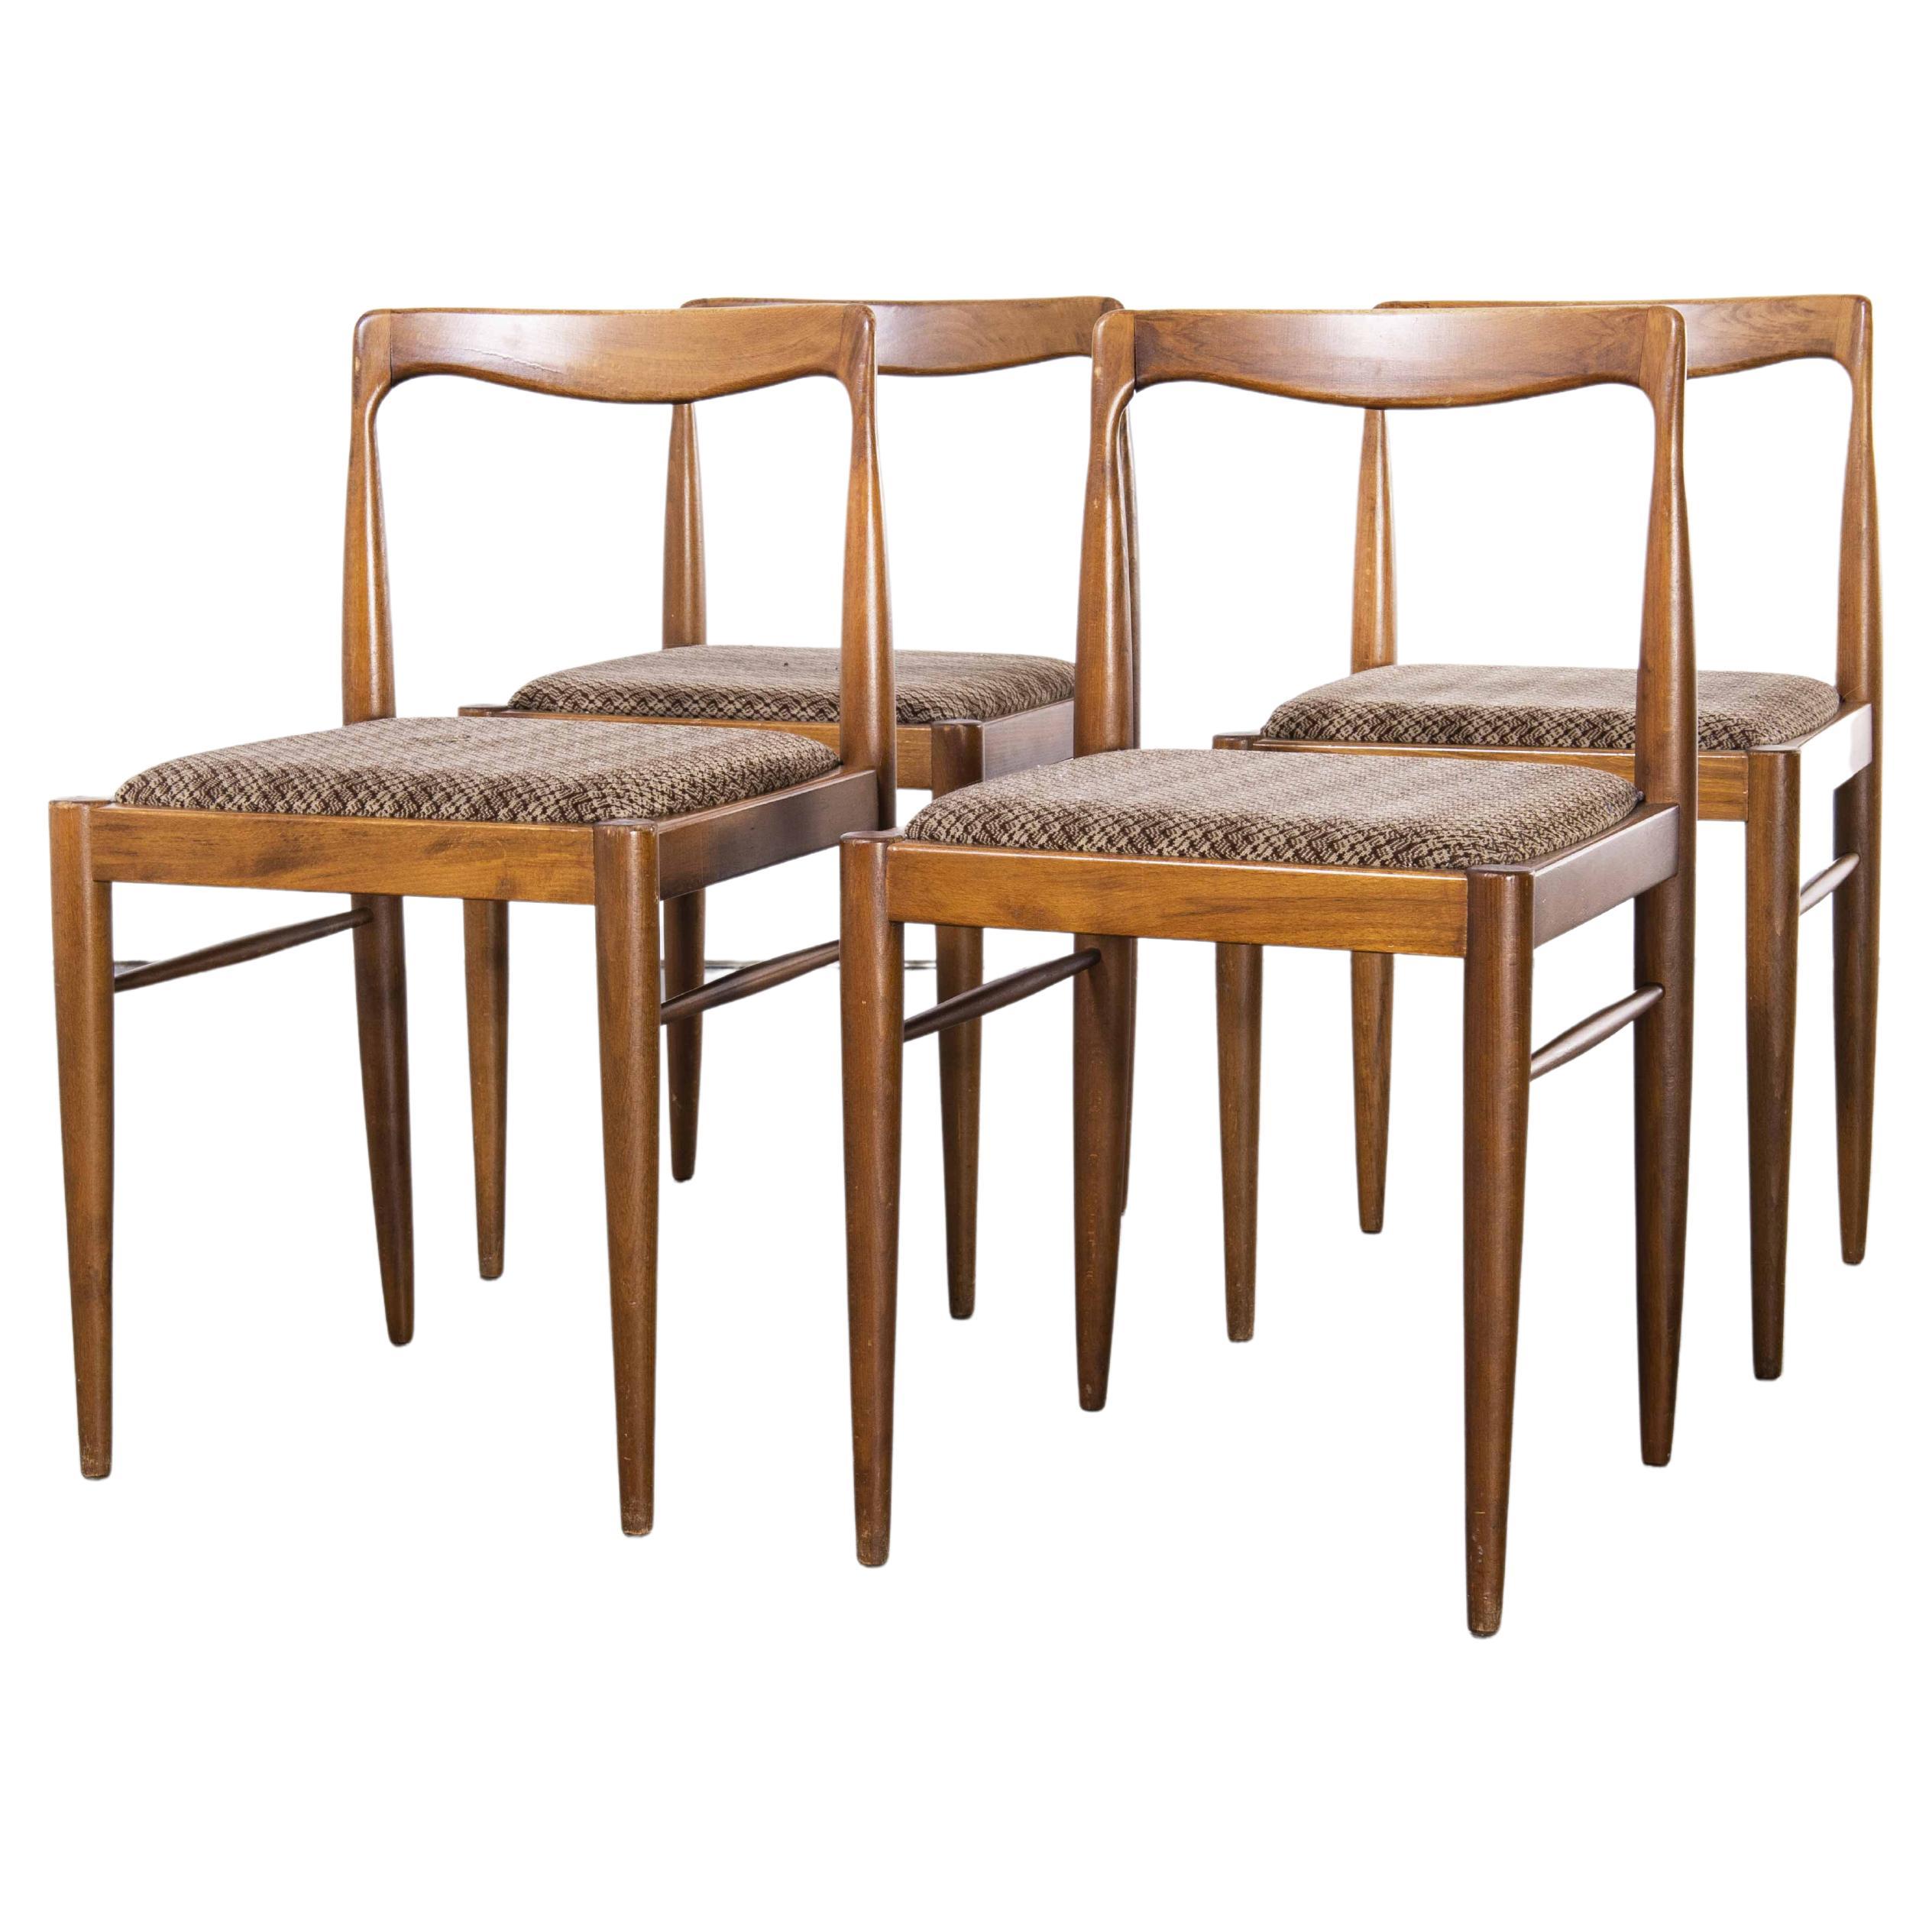 1950's Mid Century Teak Dining Chairs, Set of Four For Sale